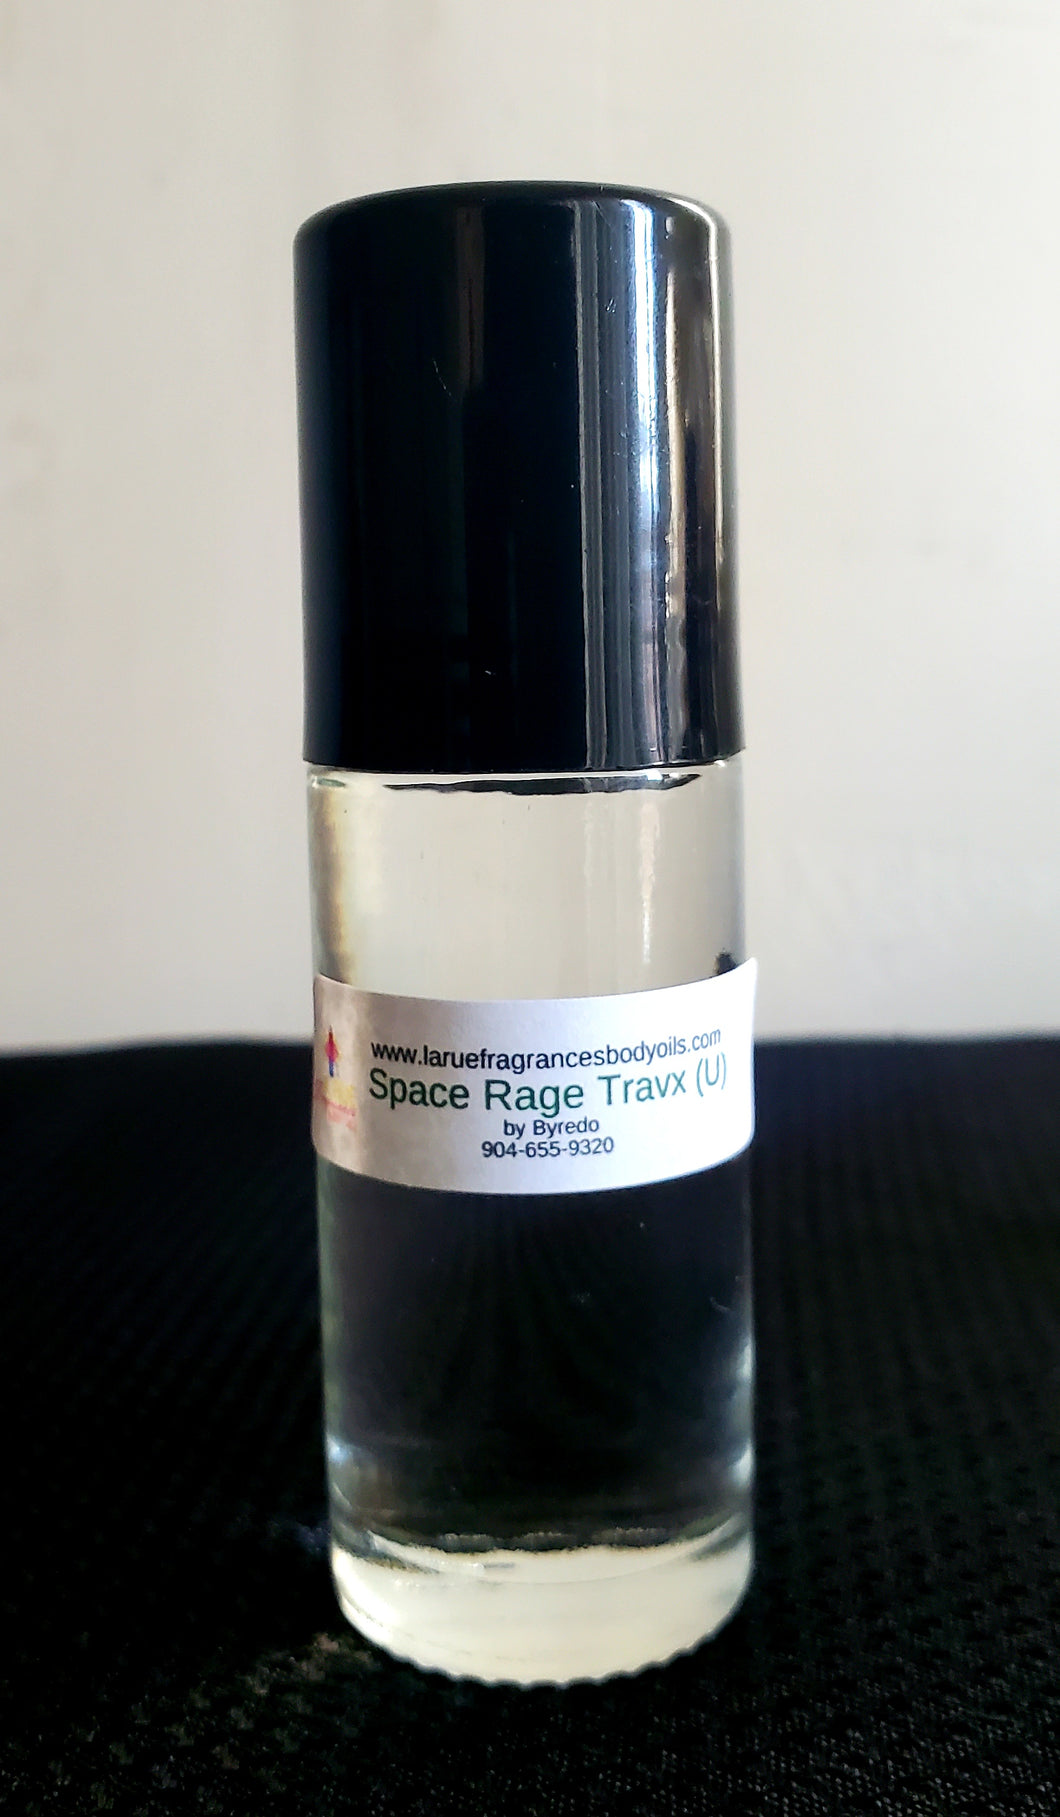 Our Impression of Space Rage Travx by Byredo 1oz Large Roll On Bottle (Unisex)